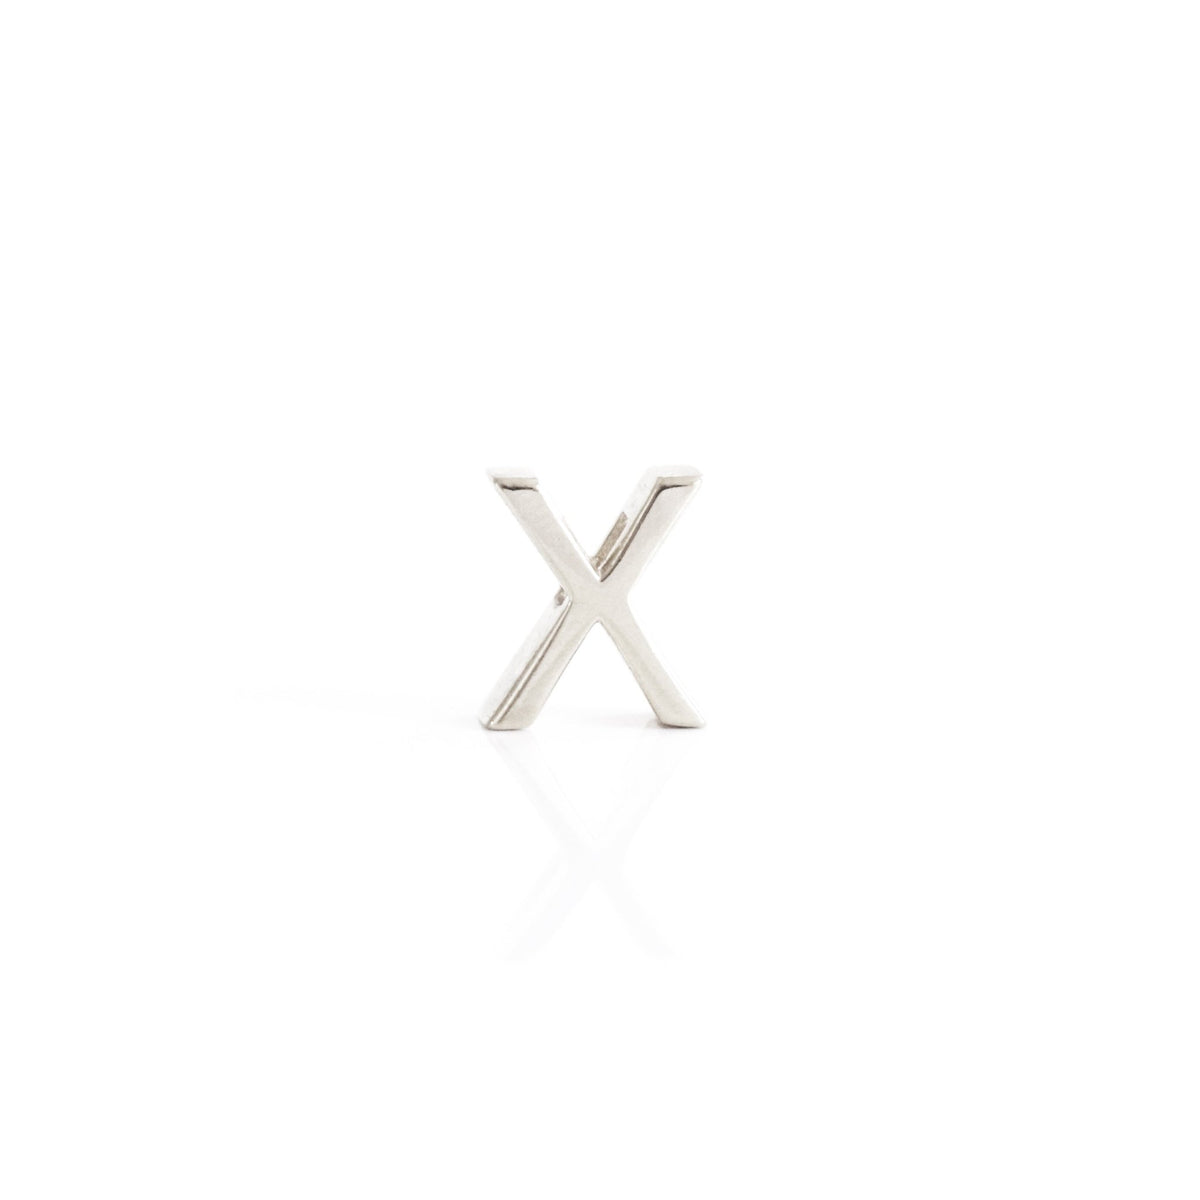 CHARMED INITIAL - X - GOLD OR SILVER - SO PRETTY CARA COTTER